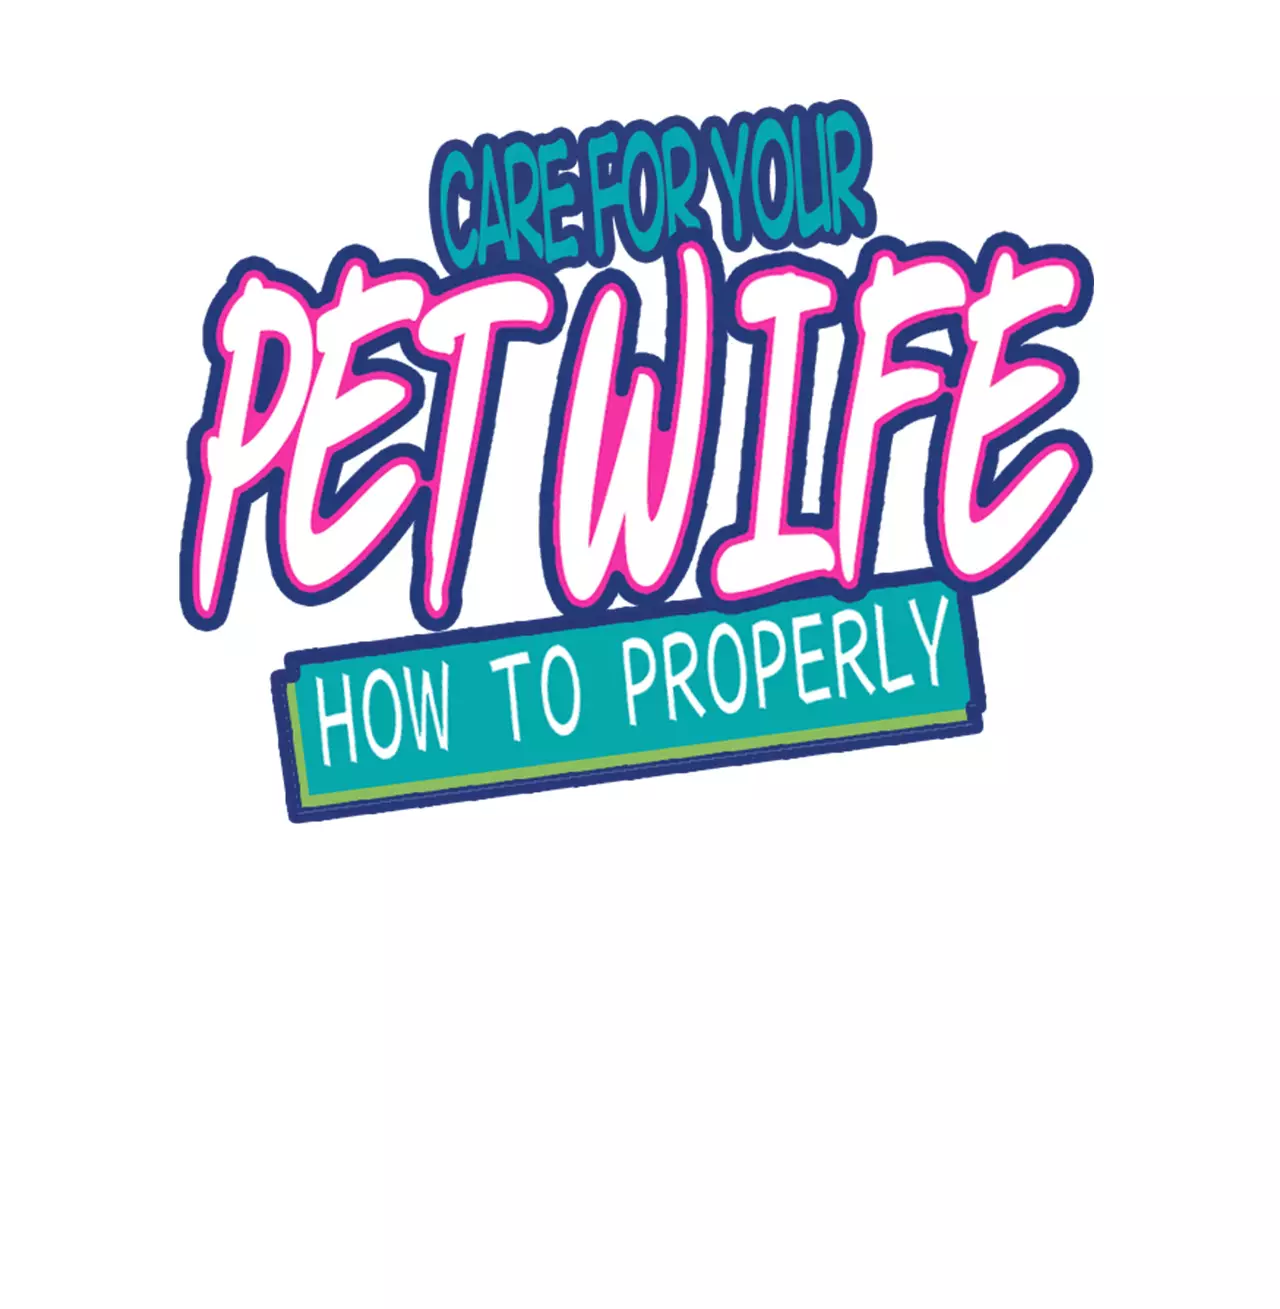 How To Properly Care For Your Pet Wife - 26.1 page 1-b7e4c109